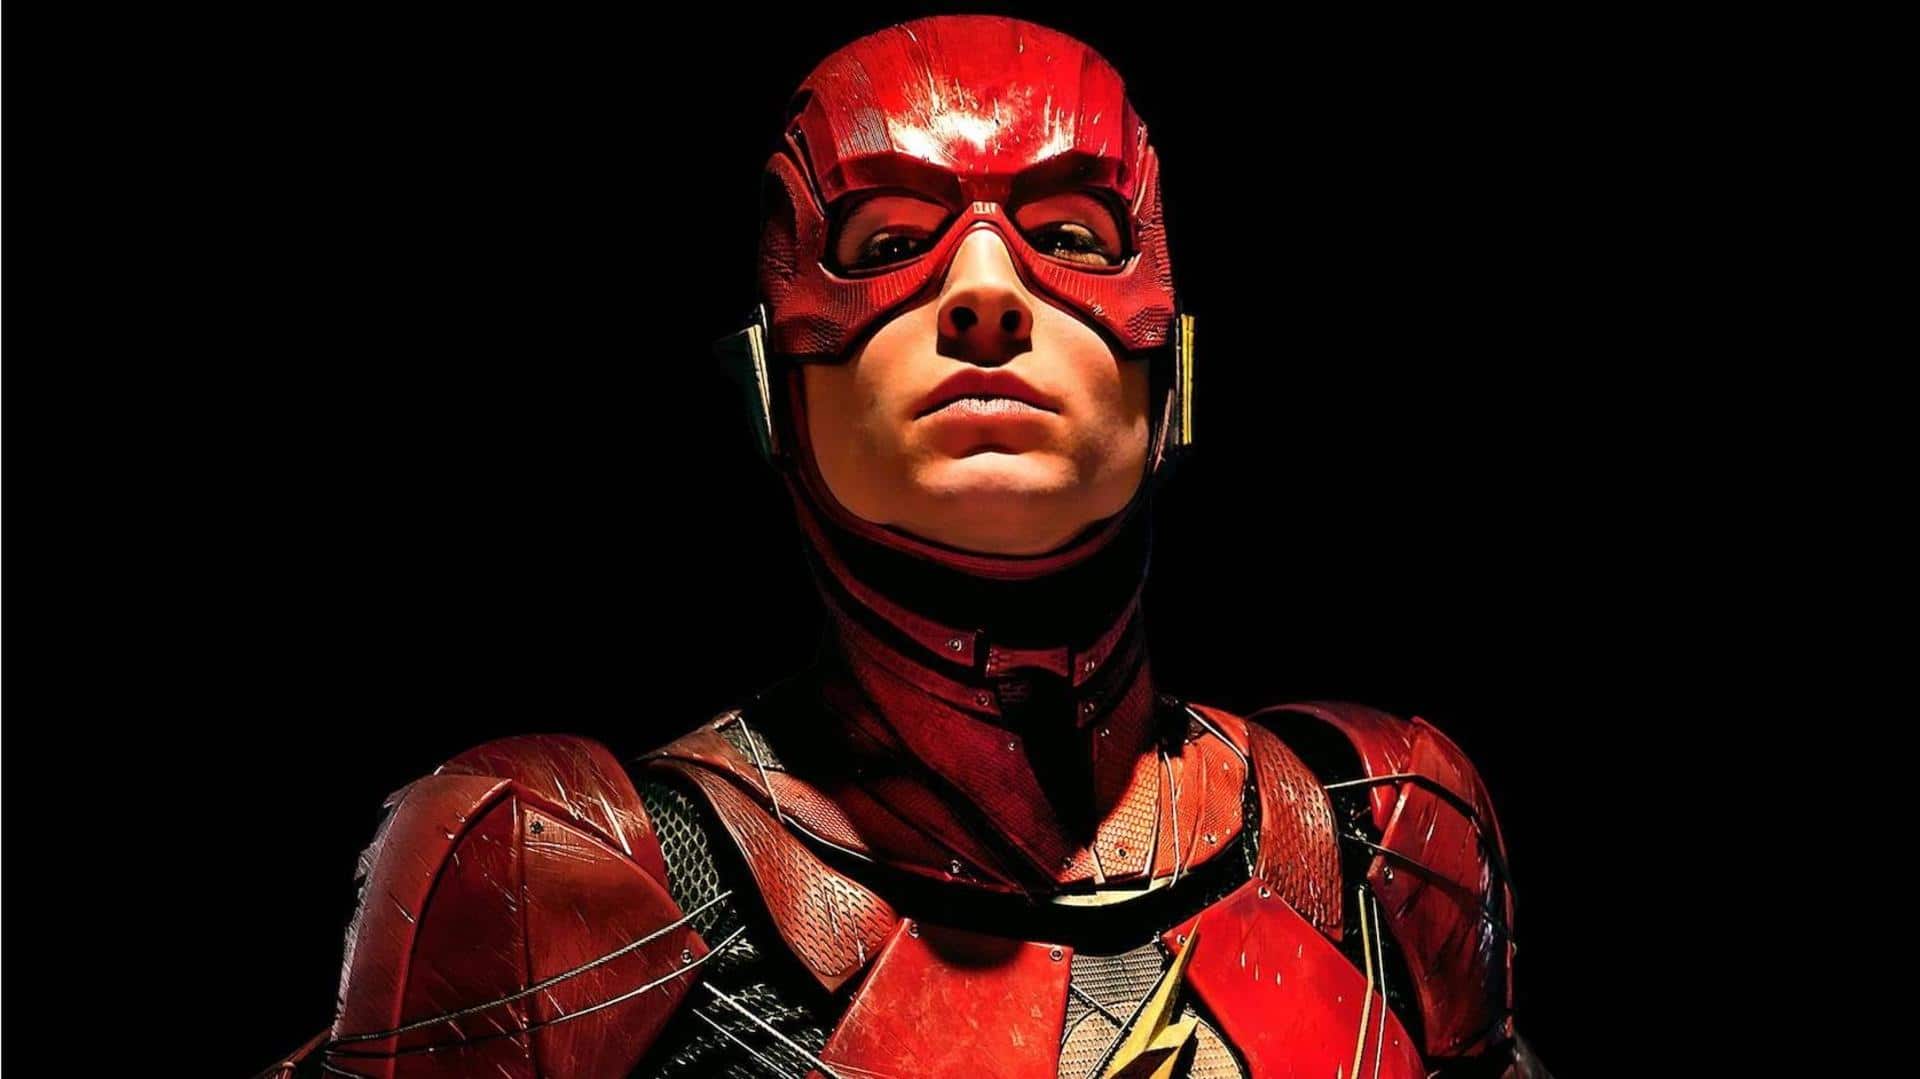 Ezra Miller being replaced as The Flash? Here's the truth